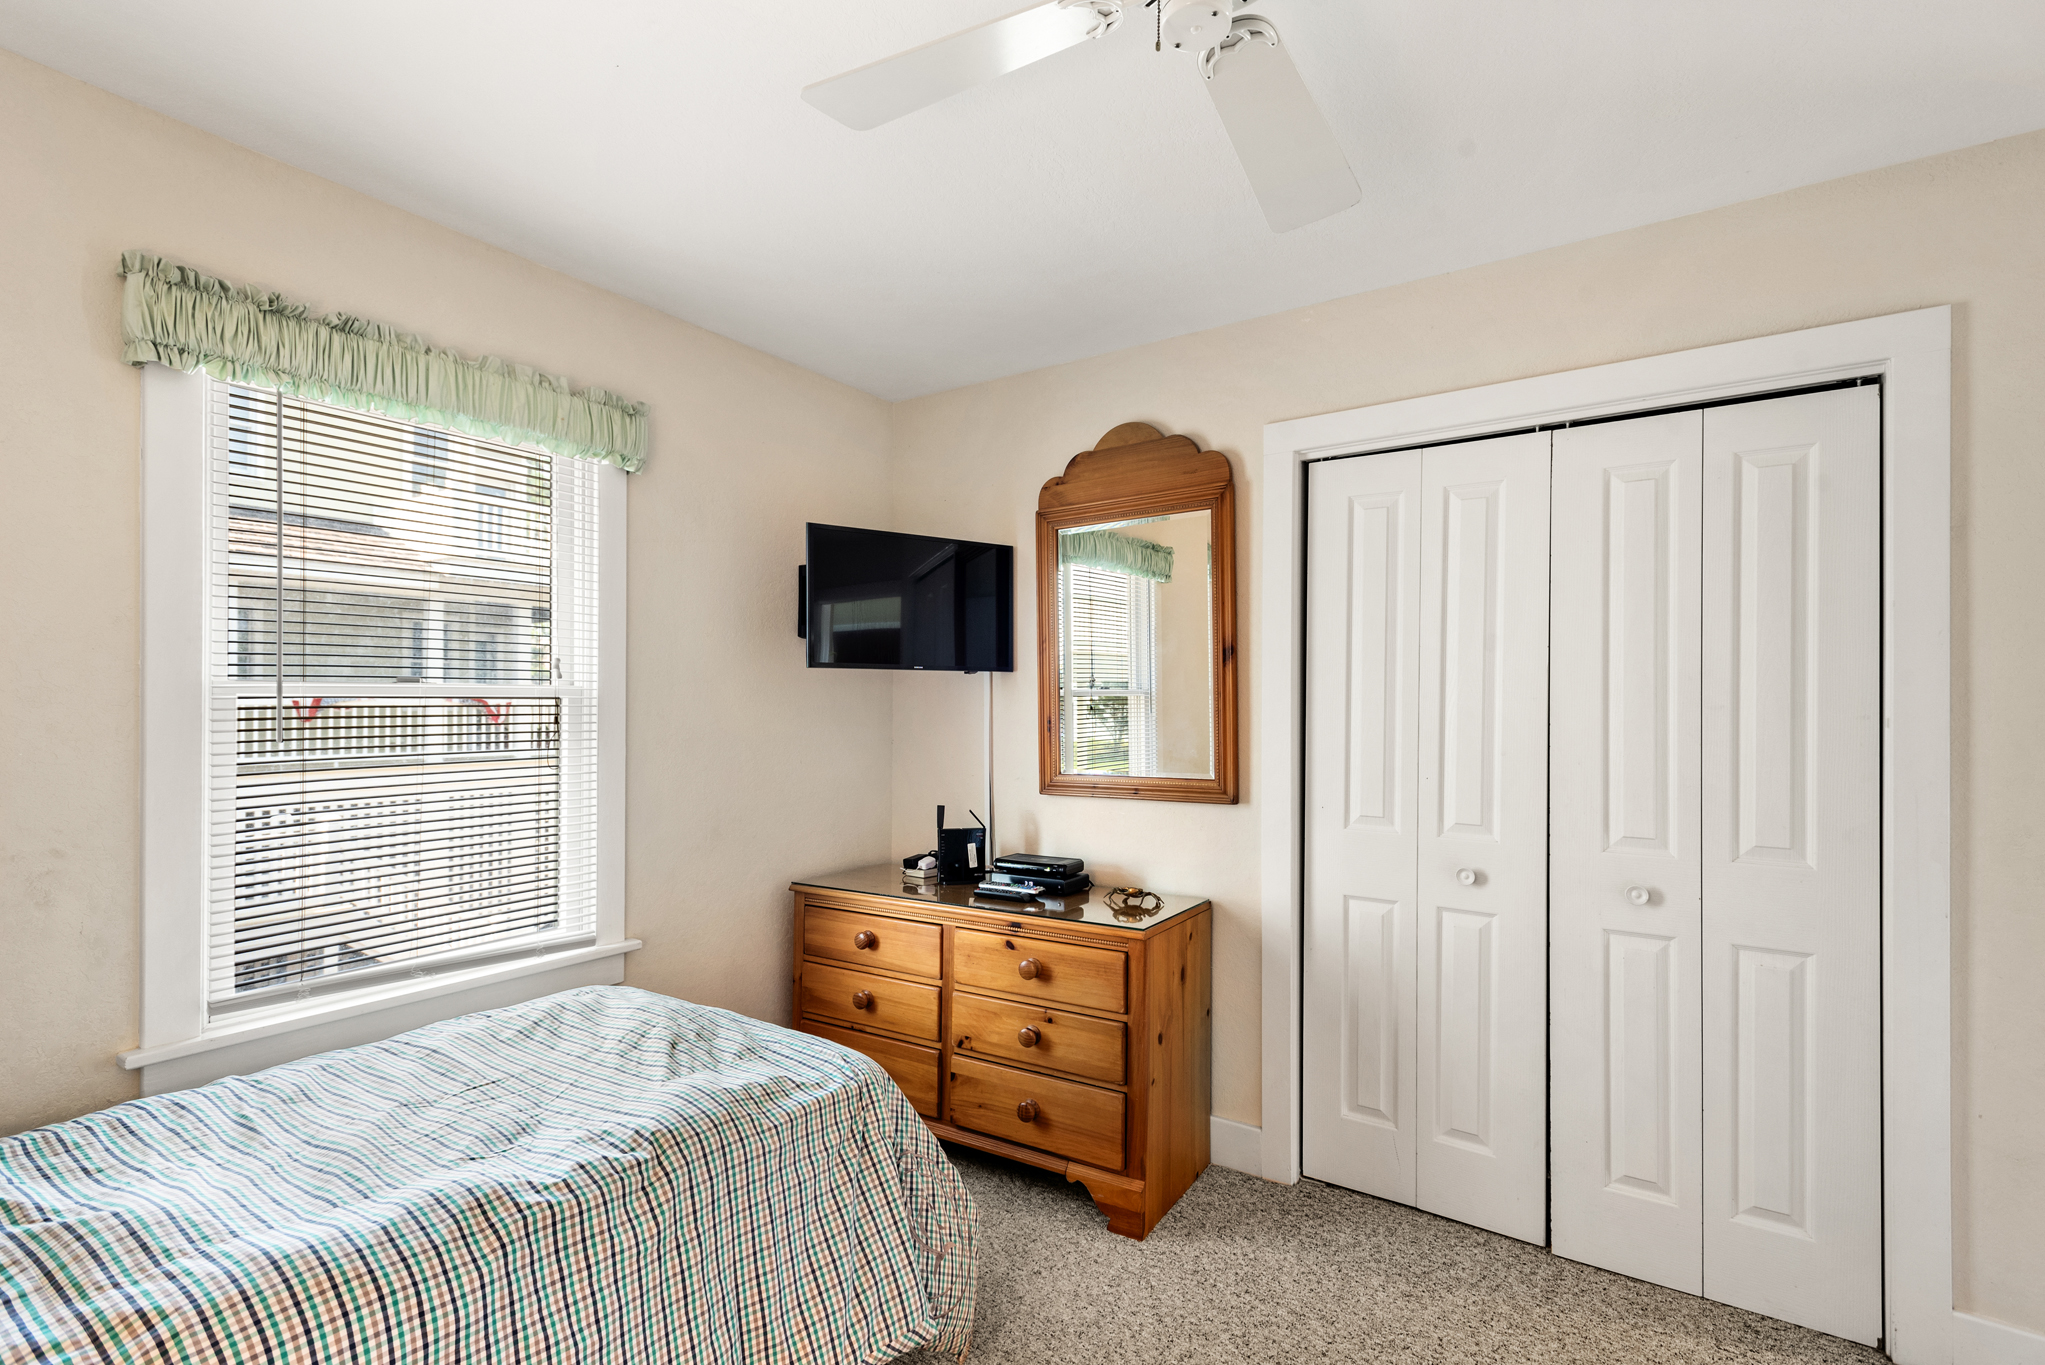 MS26: Sand Hills South | Mid Level Bedroom 3